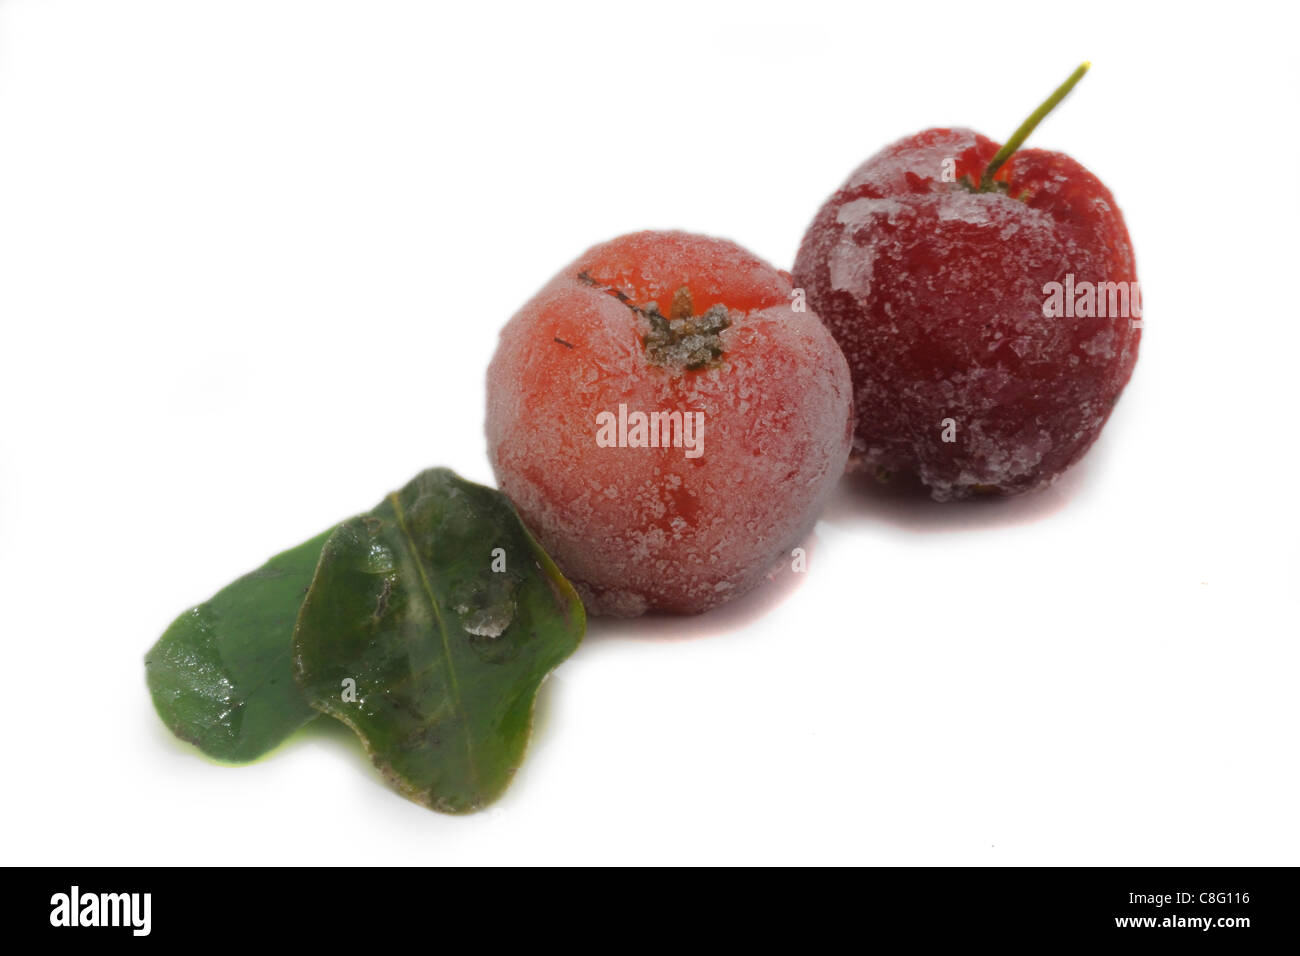 Frozen Acerola (Malpighia glabra), or Acerolla, fruits and leaves on white background Stock Photo